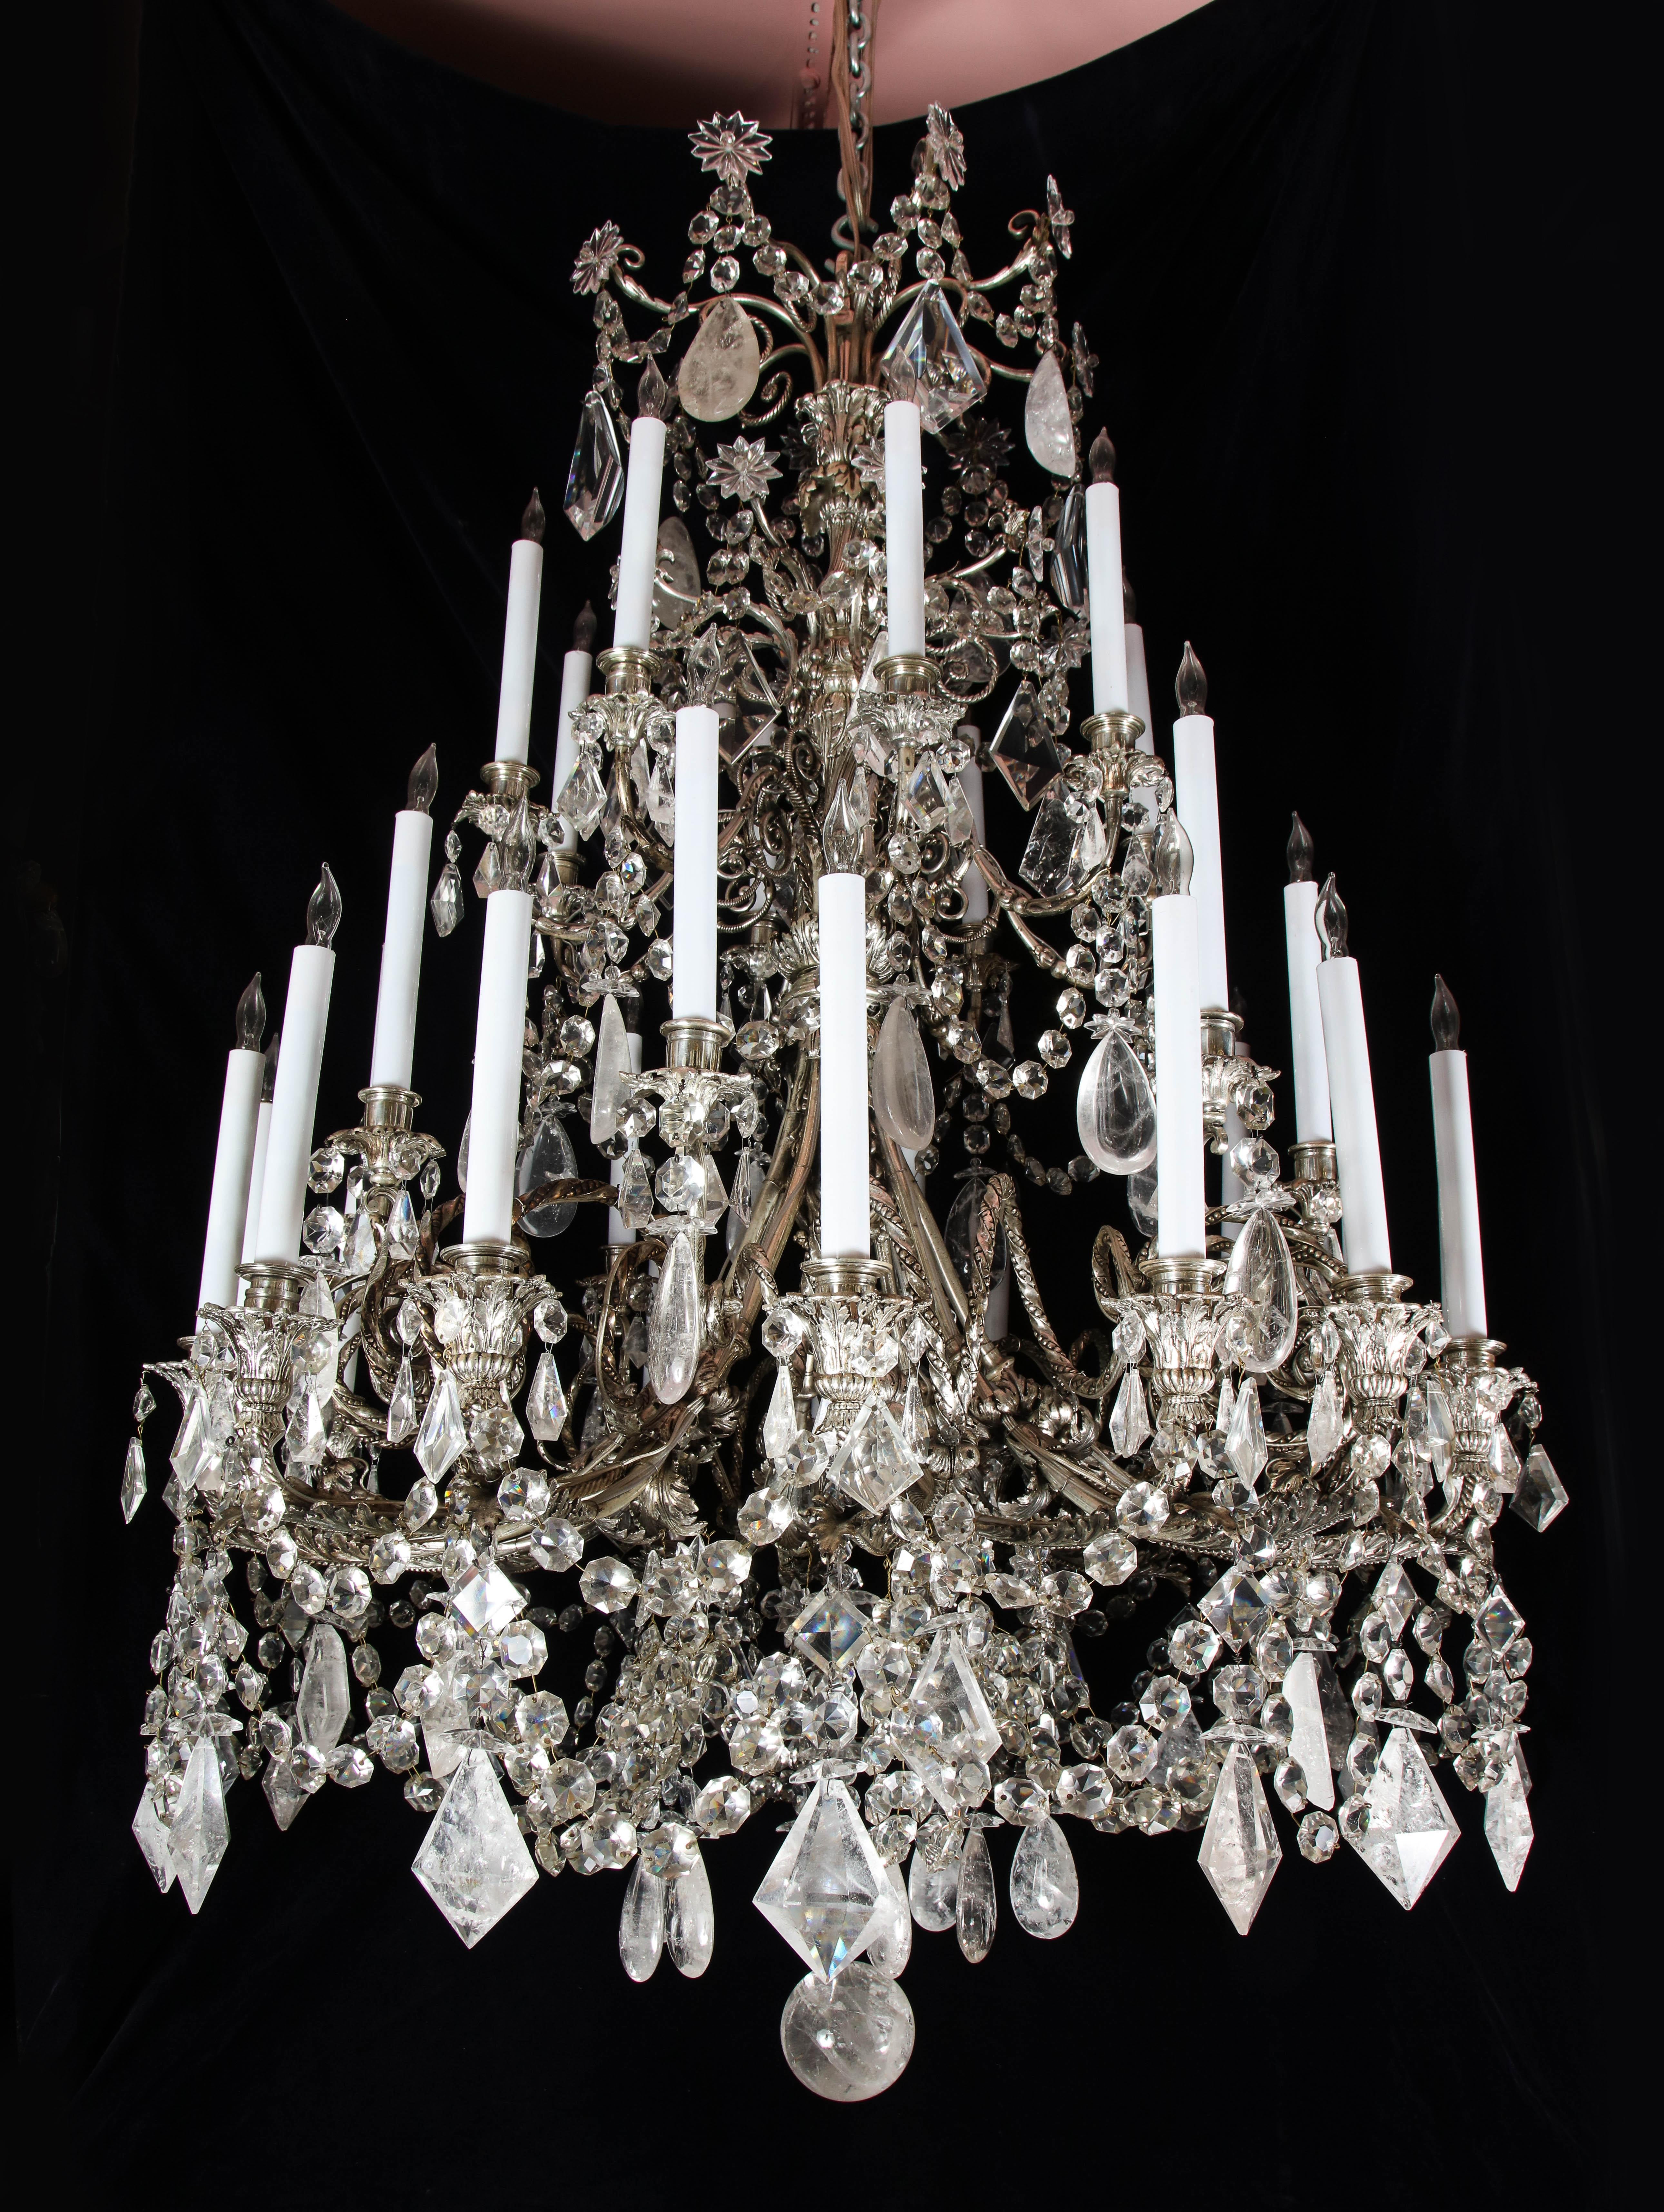 A spectacular and large antique French Louis XVI style silvered bronze, cut rock crystal and crystal 32 light triple tier chandelier of superb craftsmanship and unusual shape embellished with cut rock crystal prisms, cut crystal prisms and further